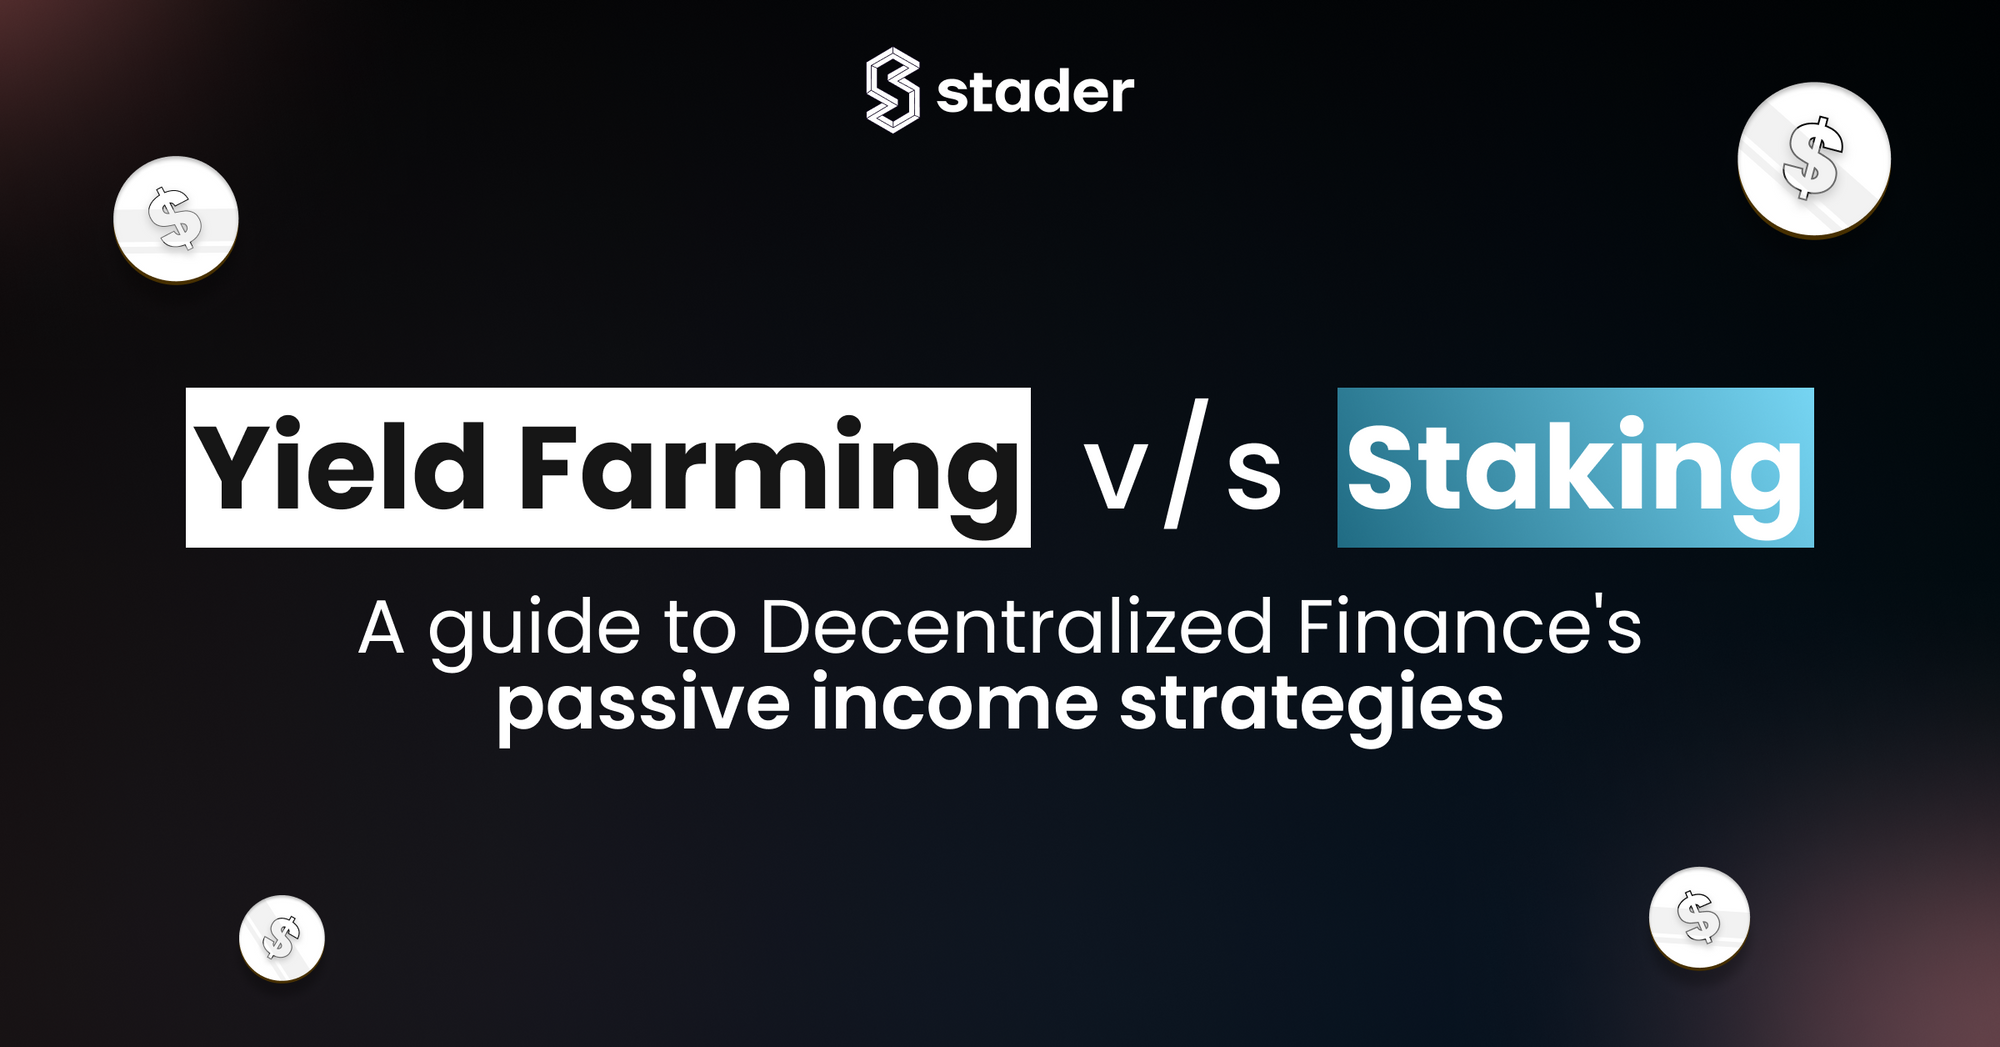 Yield Farming Vs. Staking: A guide to Decentralized Finance's passive income strategies